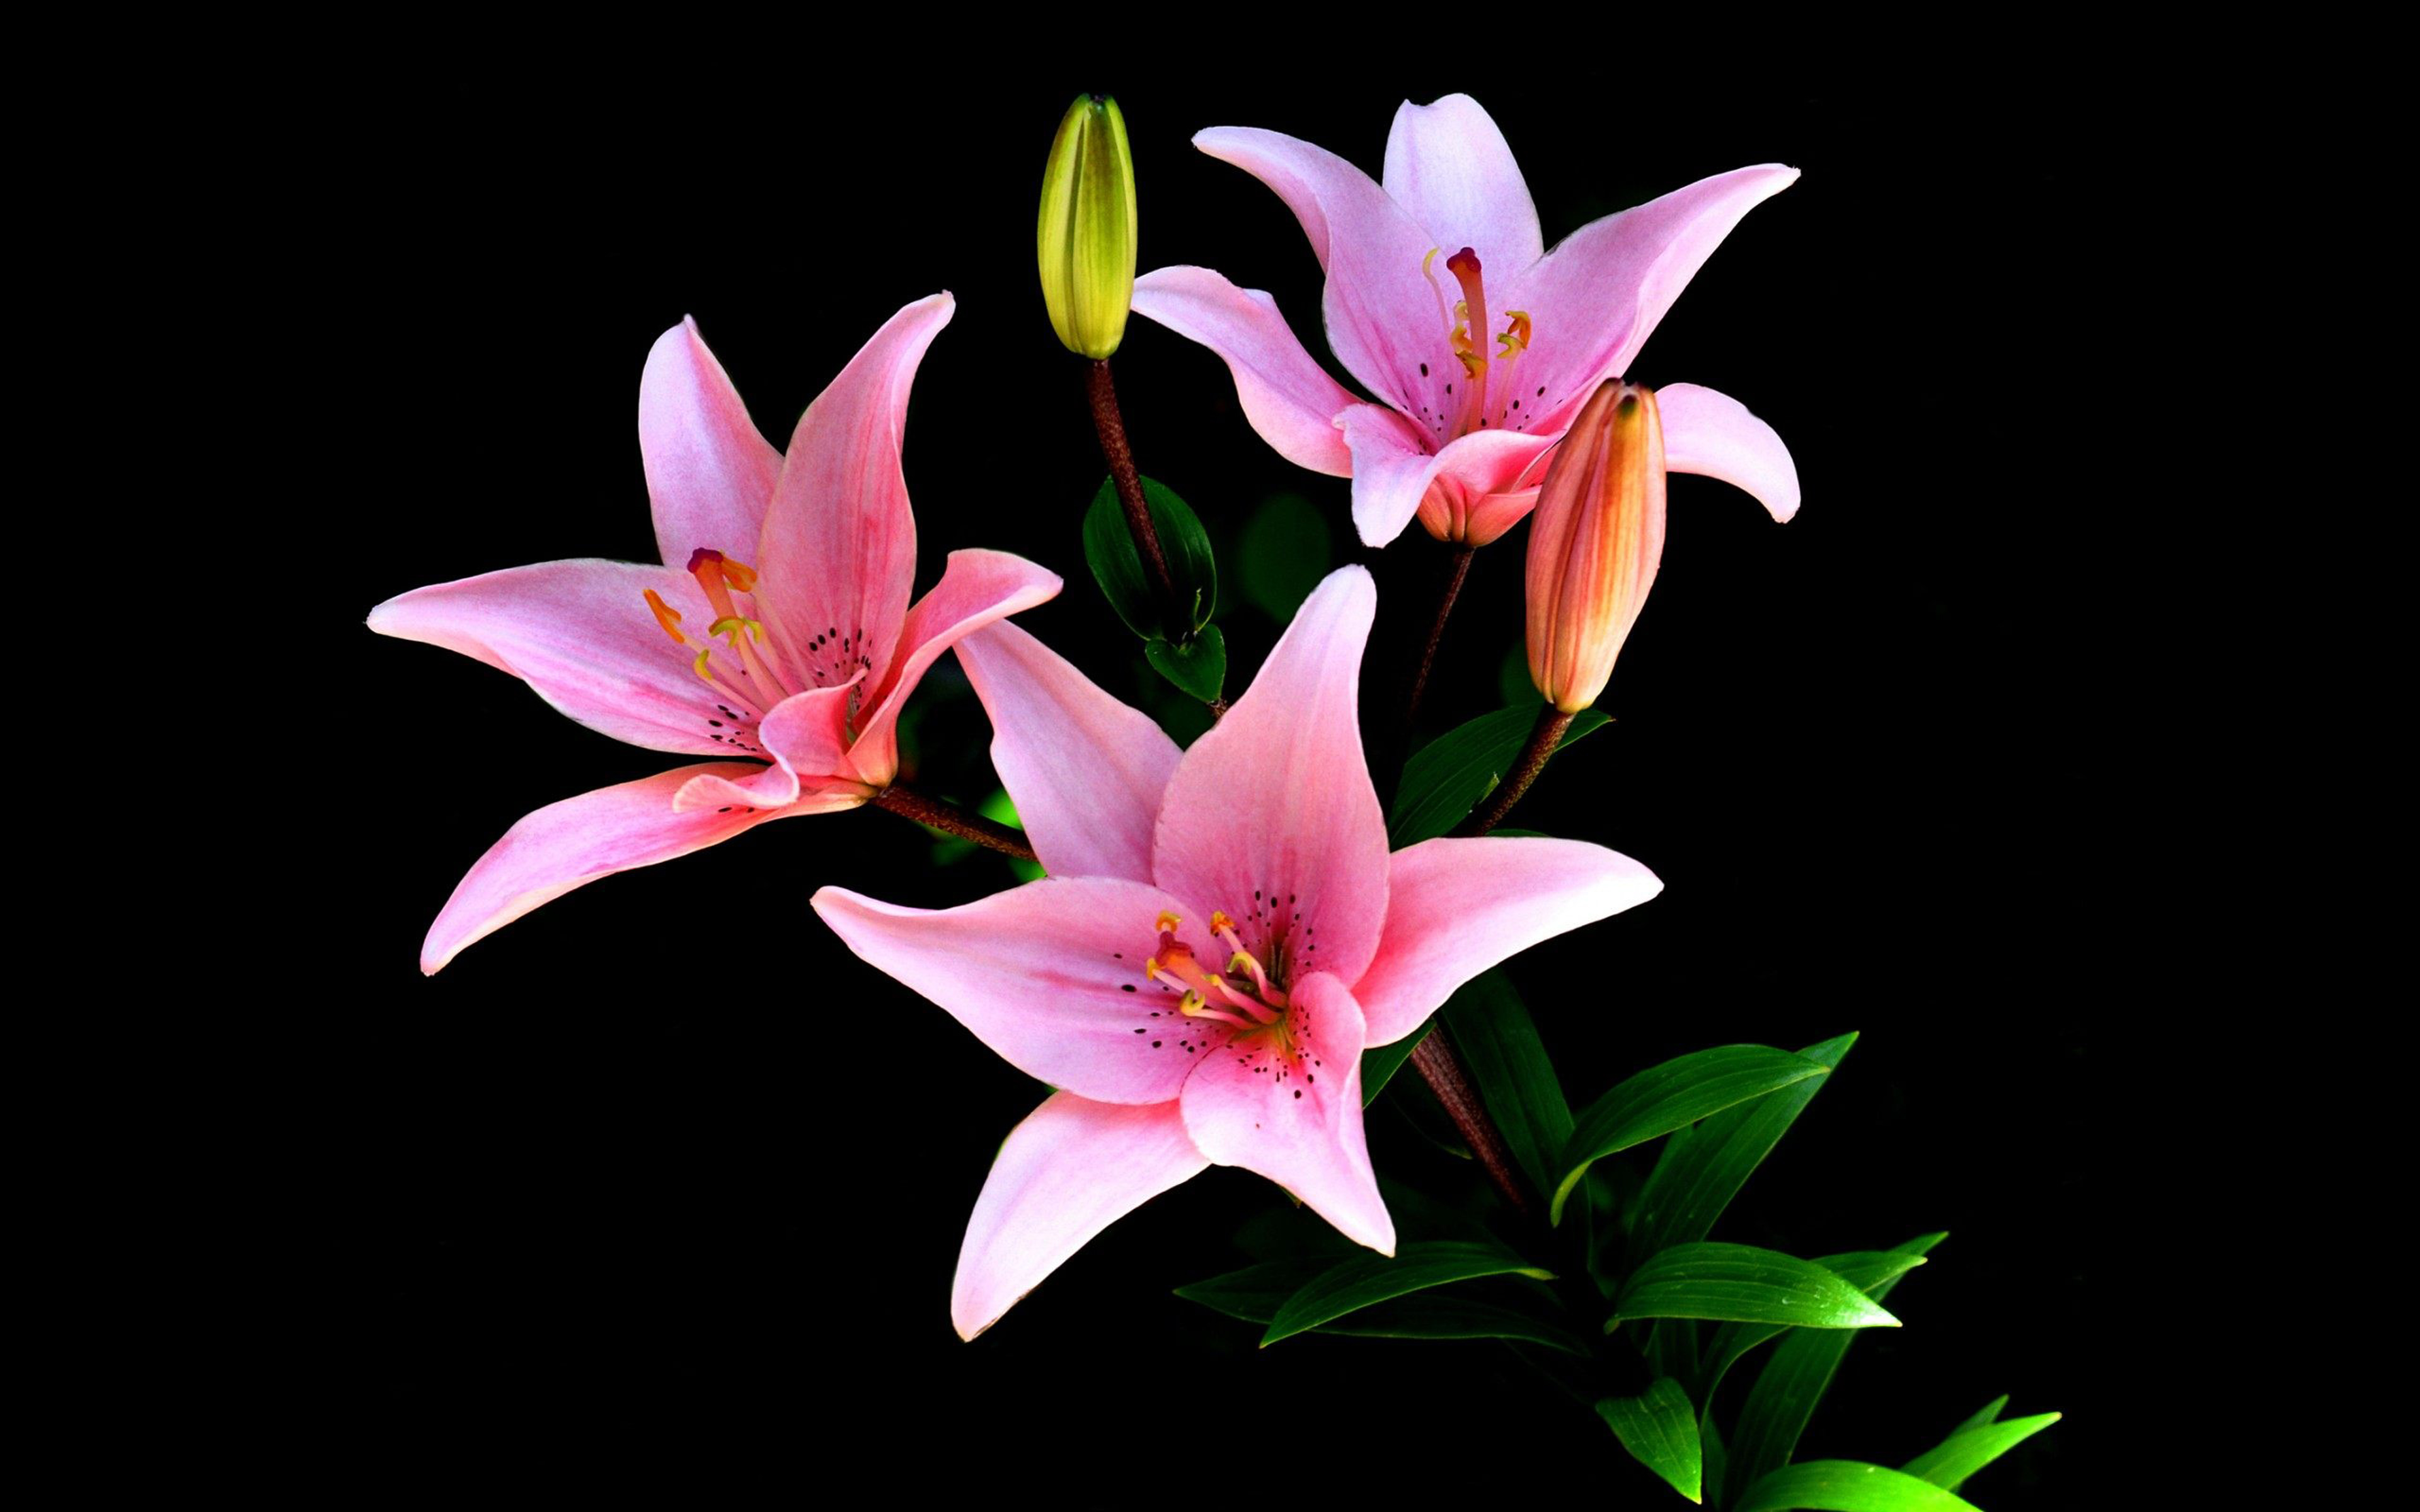 Cartoon Lily Images, HD Pictures For Free Vectors Download - Lovepik.com